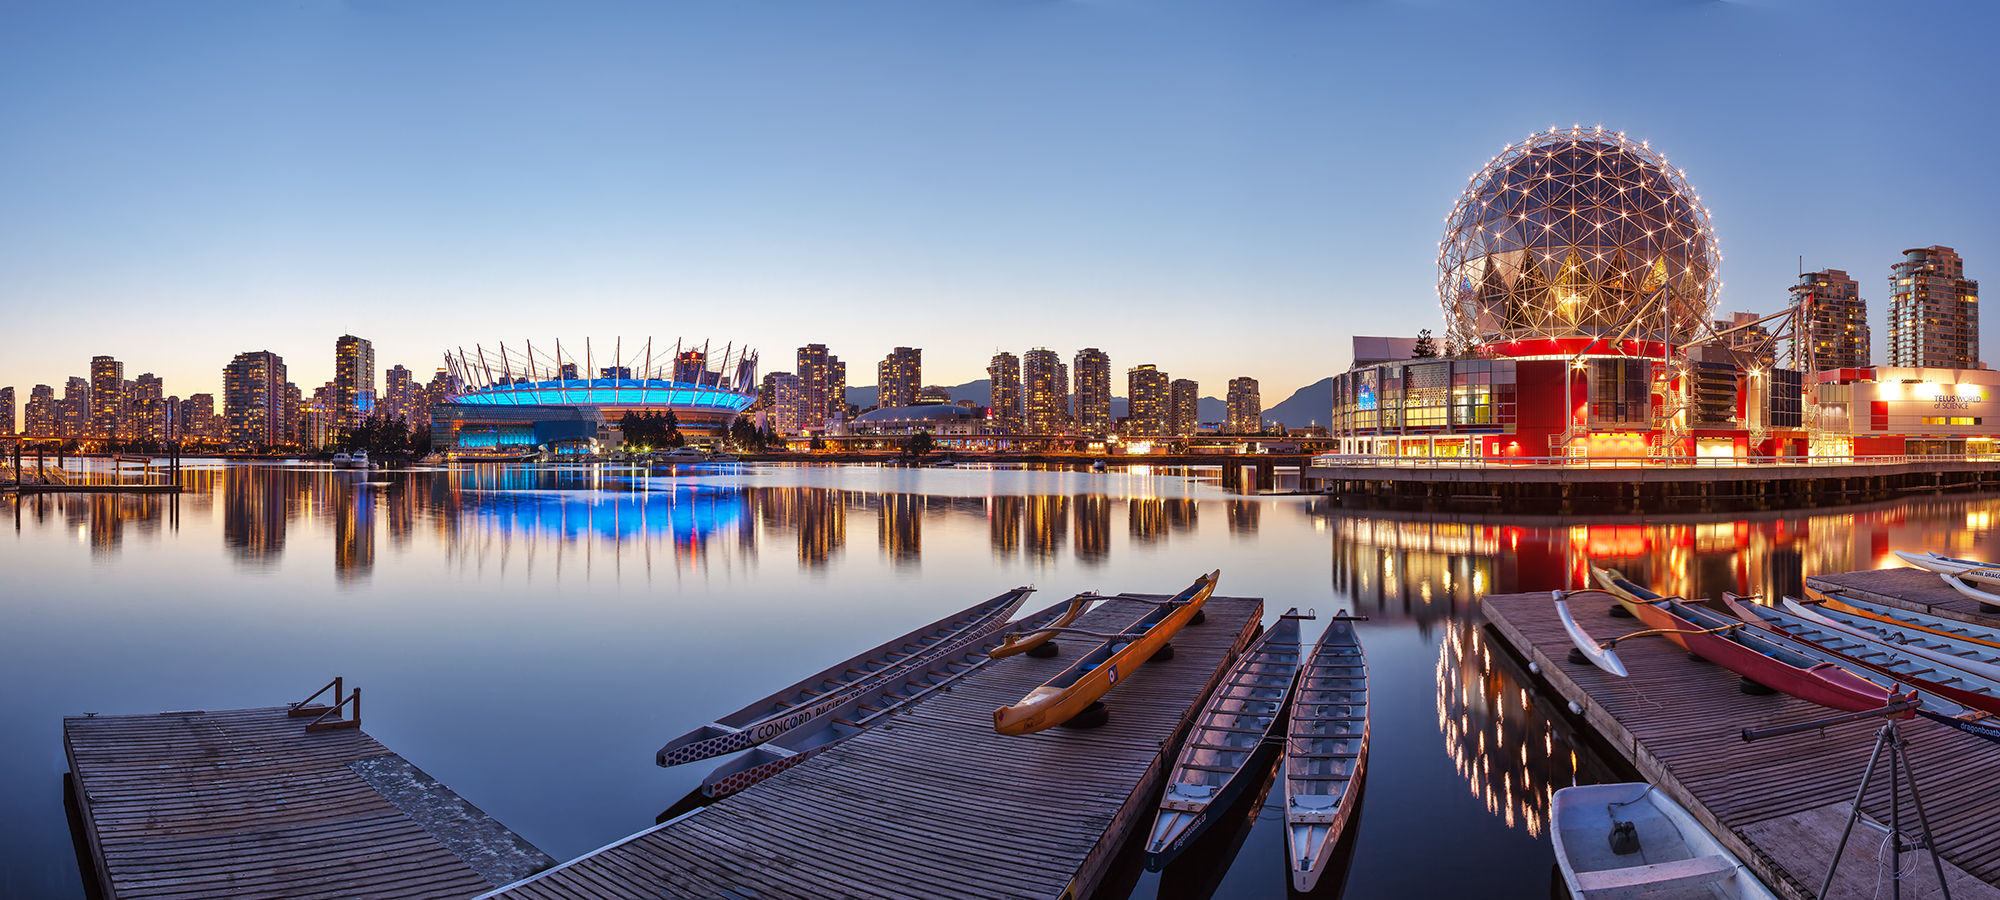 High-Resolution-Panoramic-Image-Vancouver-False-Creek-Science-World-BC-Place-Westcoast-BC-Canada